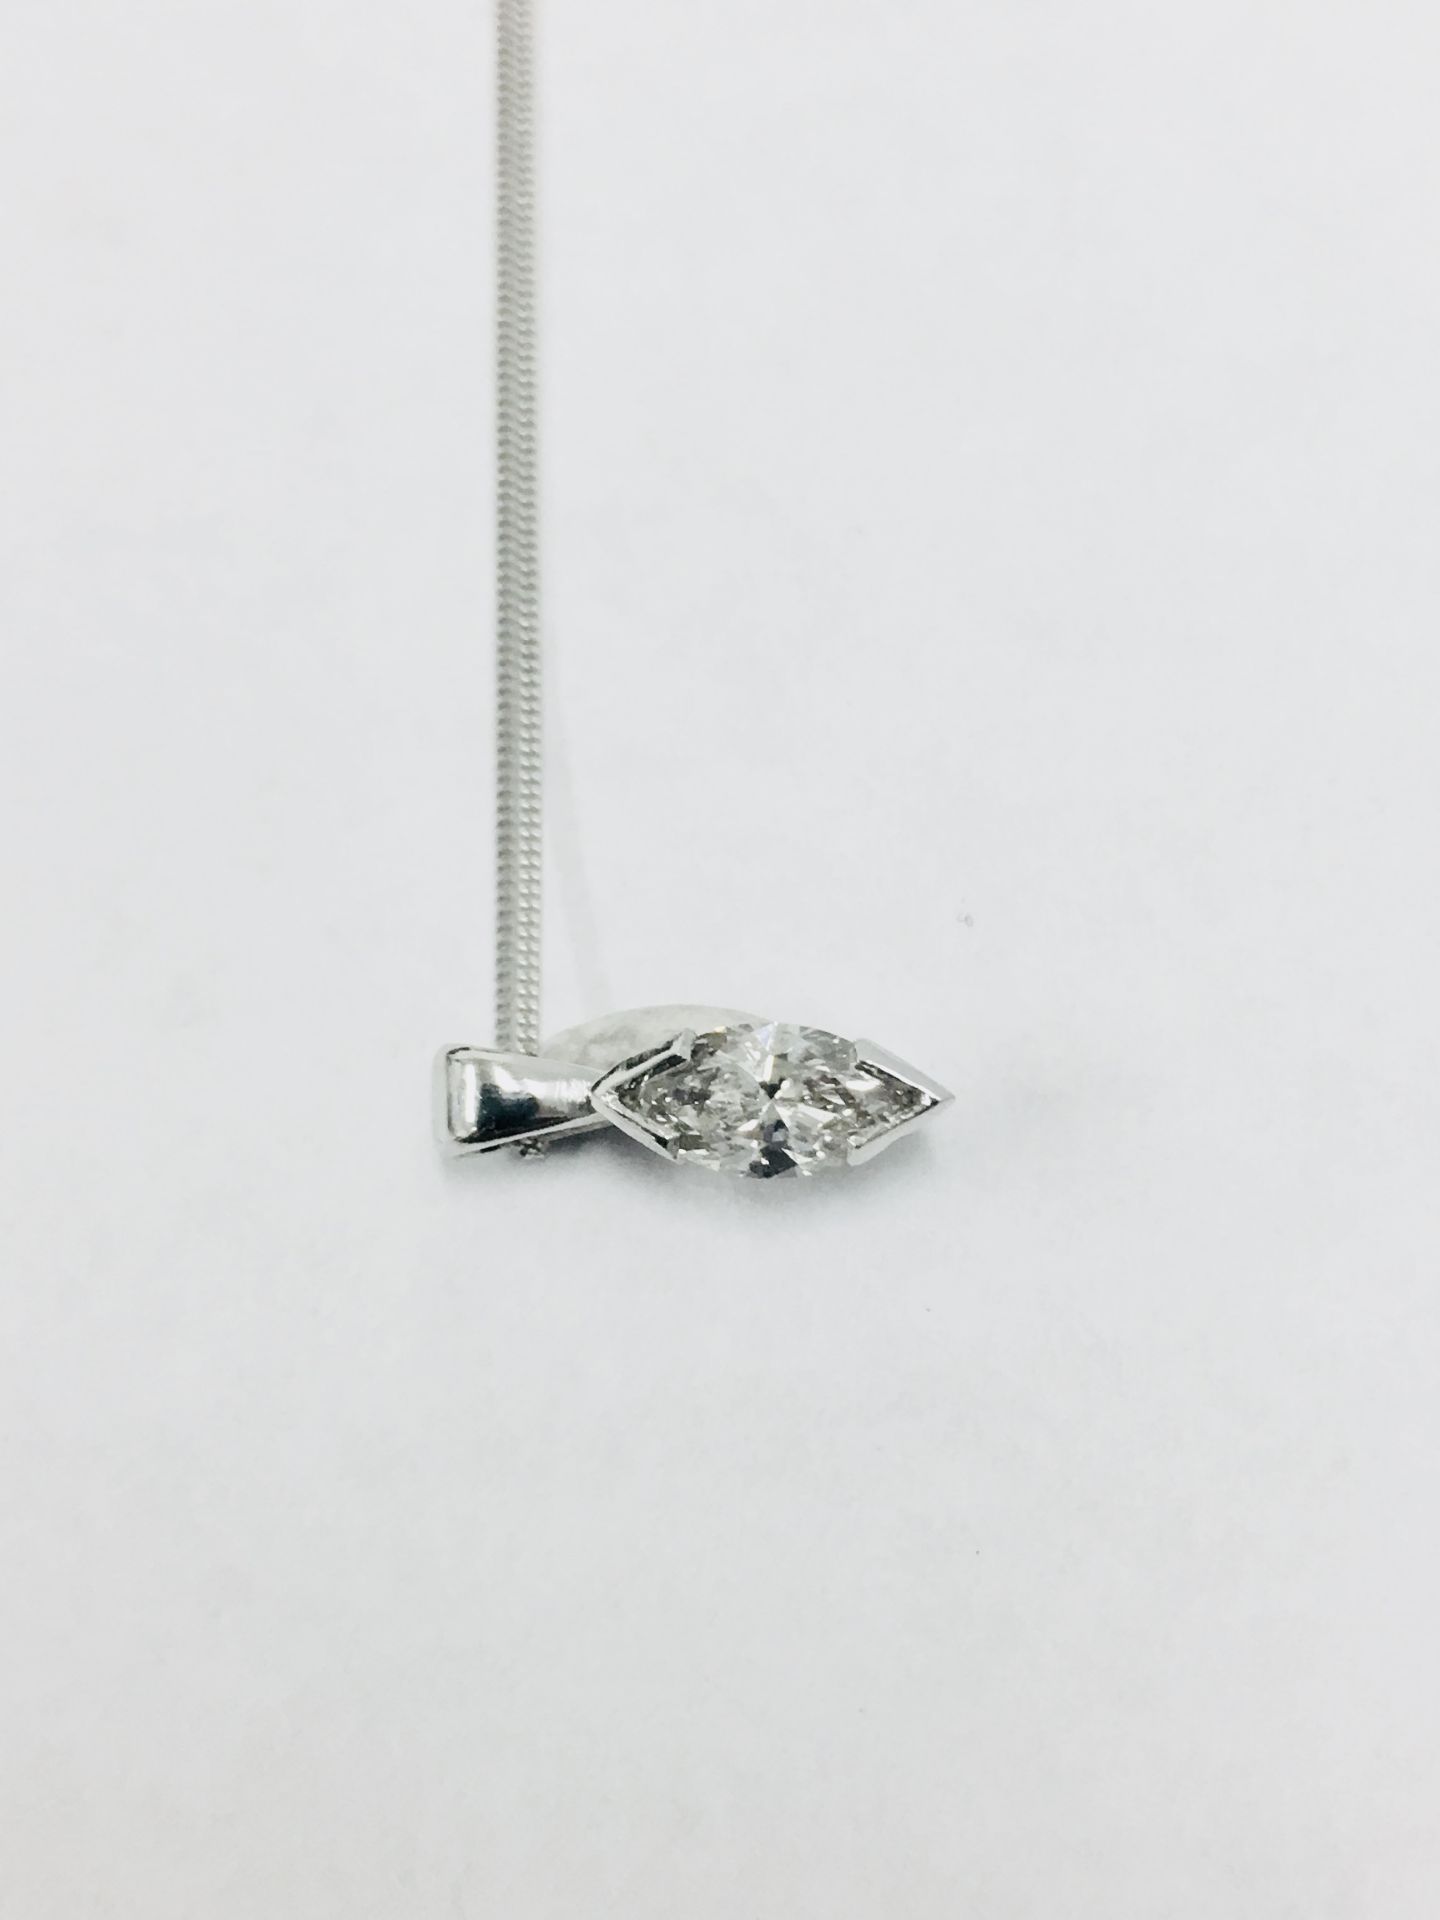 0.45ct diamond pendant with a marquise diamond. H colour and si1 clarity. 2 claw setting with - Image 3 of 3